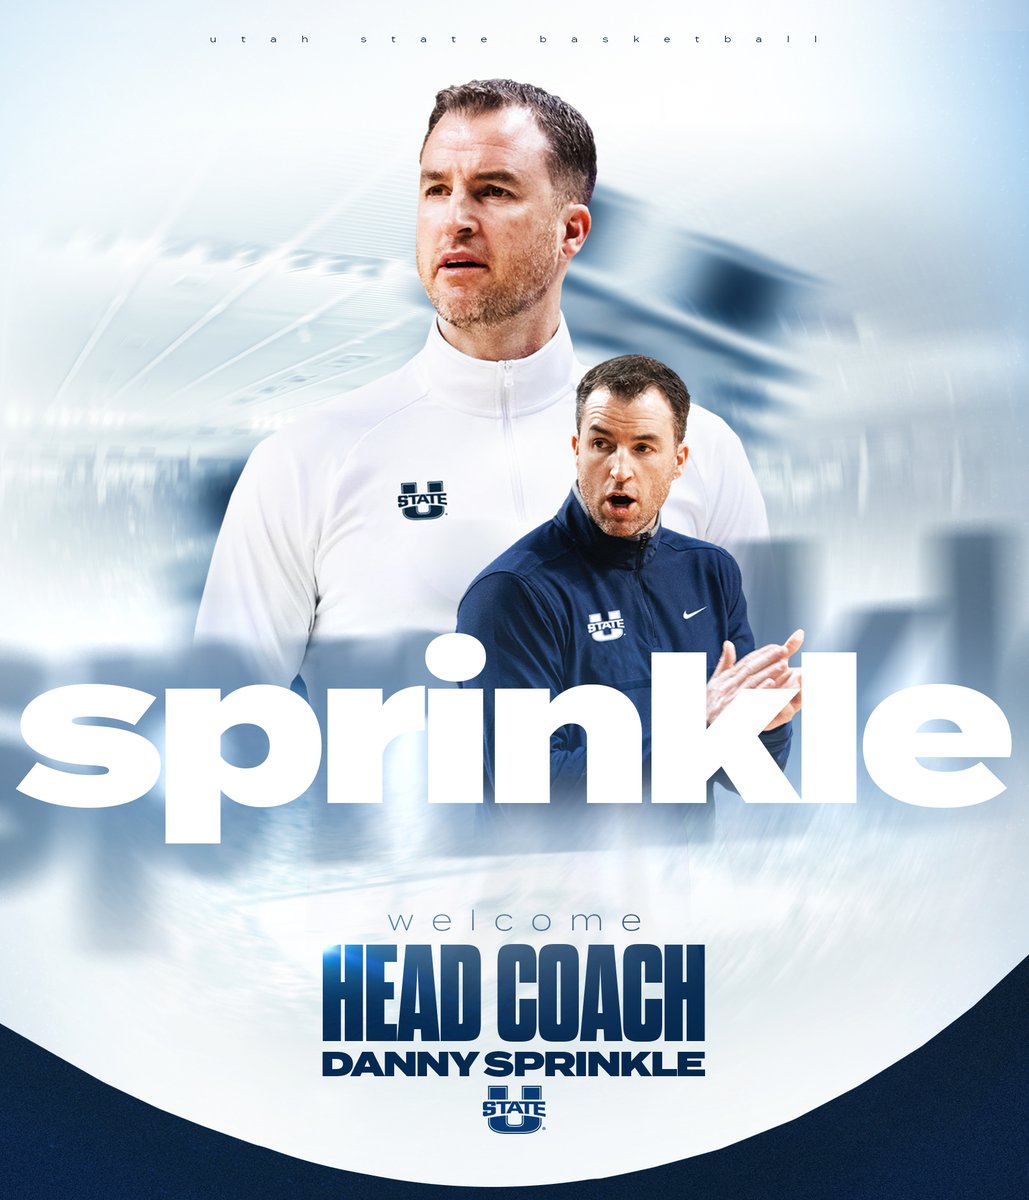 𝐓𝐡𝐞 𝐒𝐩𝐫𝐢𝐧𝐤𝐥𝐞 𝐄𝐫𝐚 𝐢𝐬 𝐇𝐄𝐑𝐄!

Welcome our newest Head Coach Danny Sprinkle to the @USUBasketball Family!

➡️ bit.ly/41buBOg

#AggiesAllTheWay